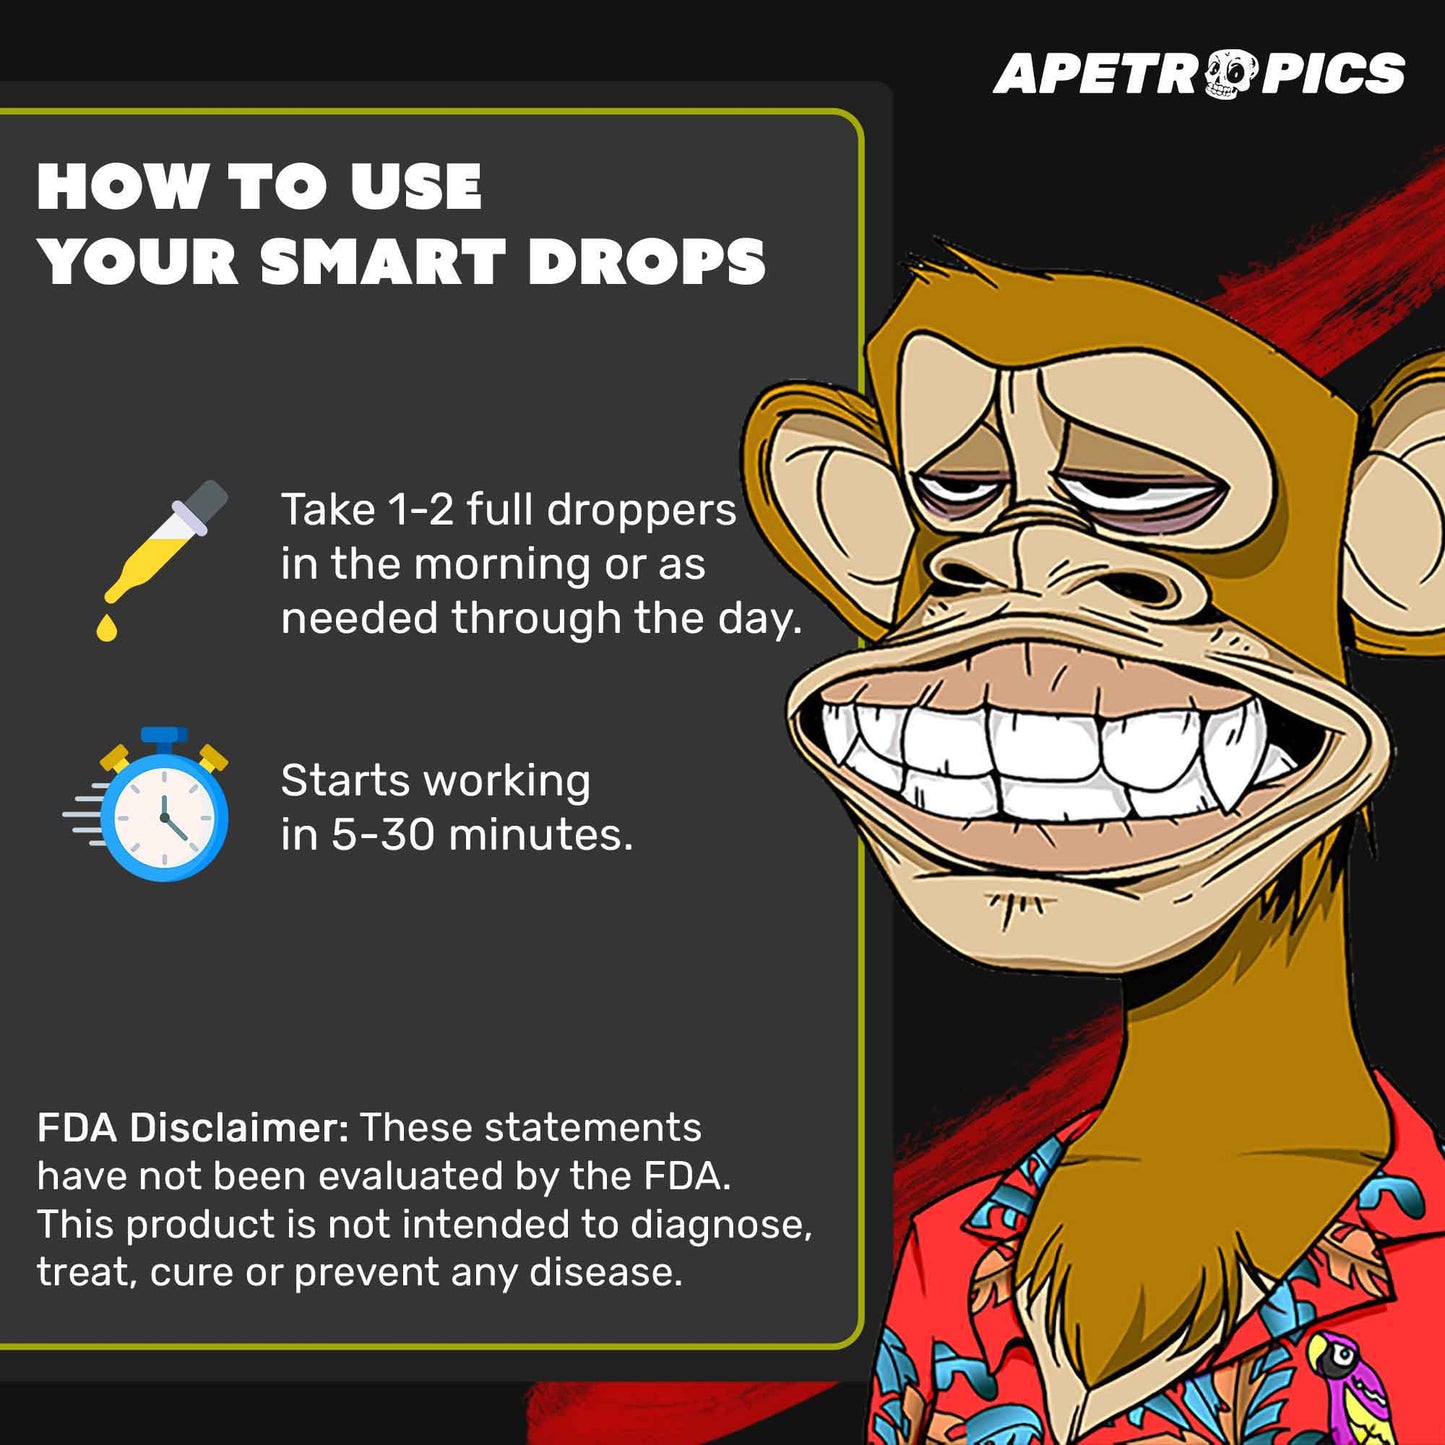 How to Use Your Smart Drops